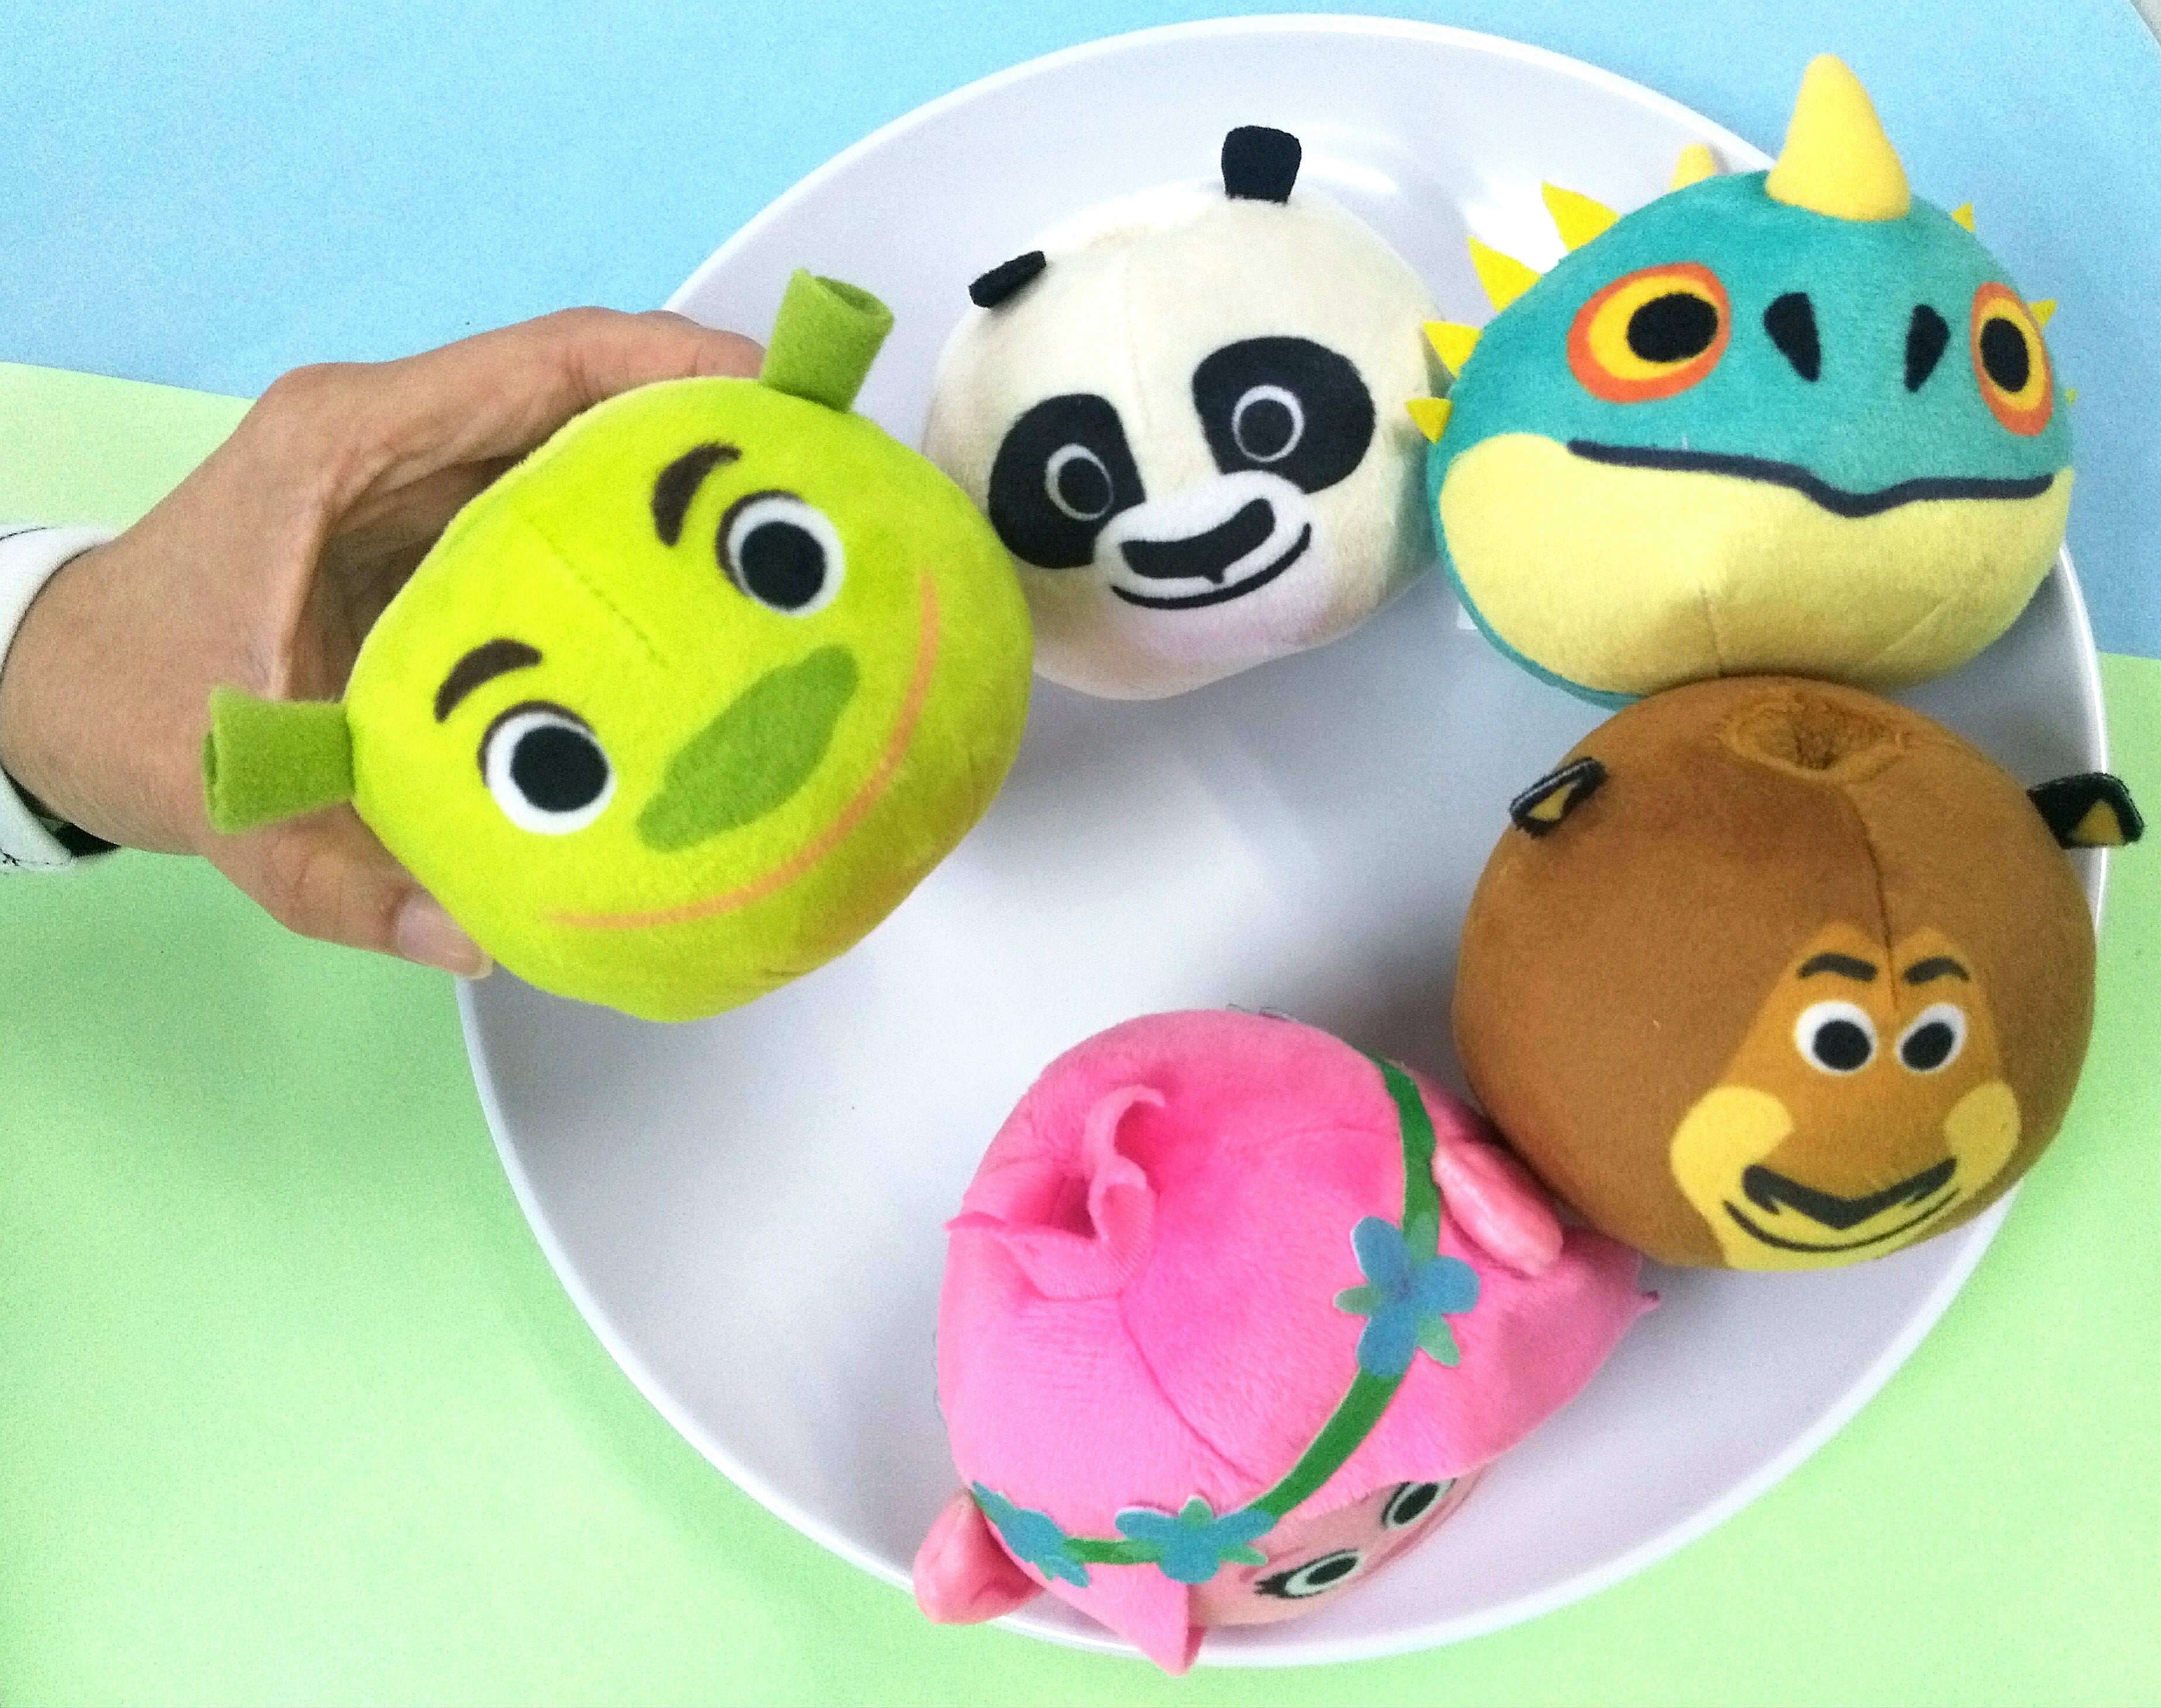 [TEST] 7-Eleven Malaysia is Giving Away DreamWorks KouKou For FREE and They're Adorable! - World Of Buzz 2